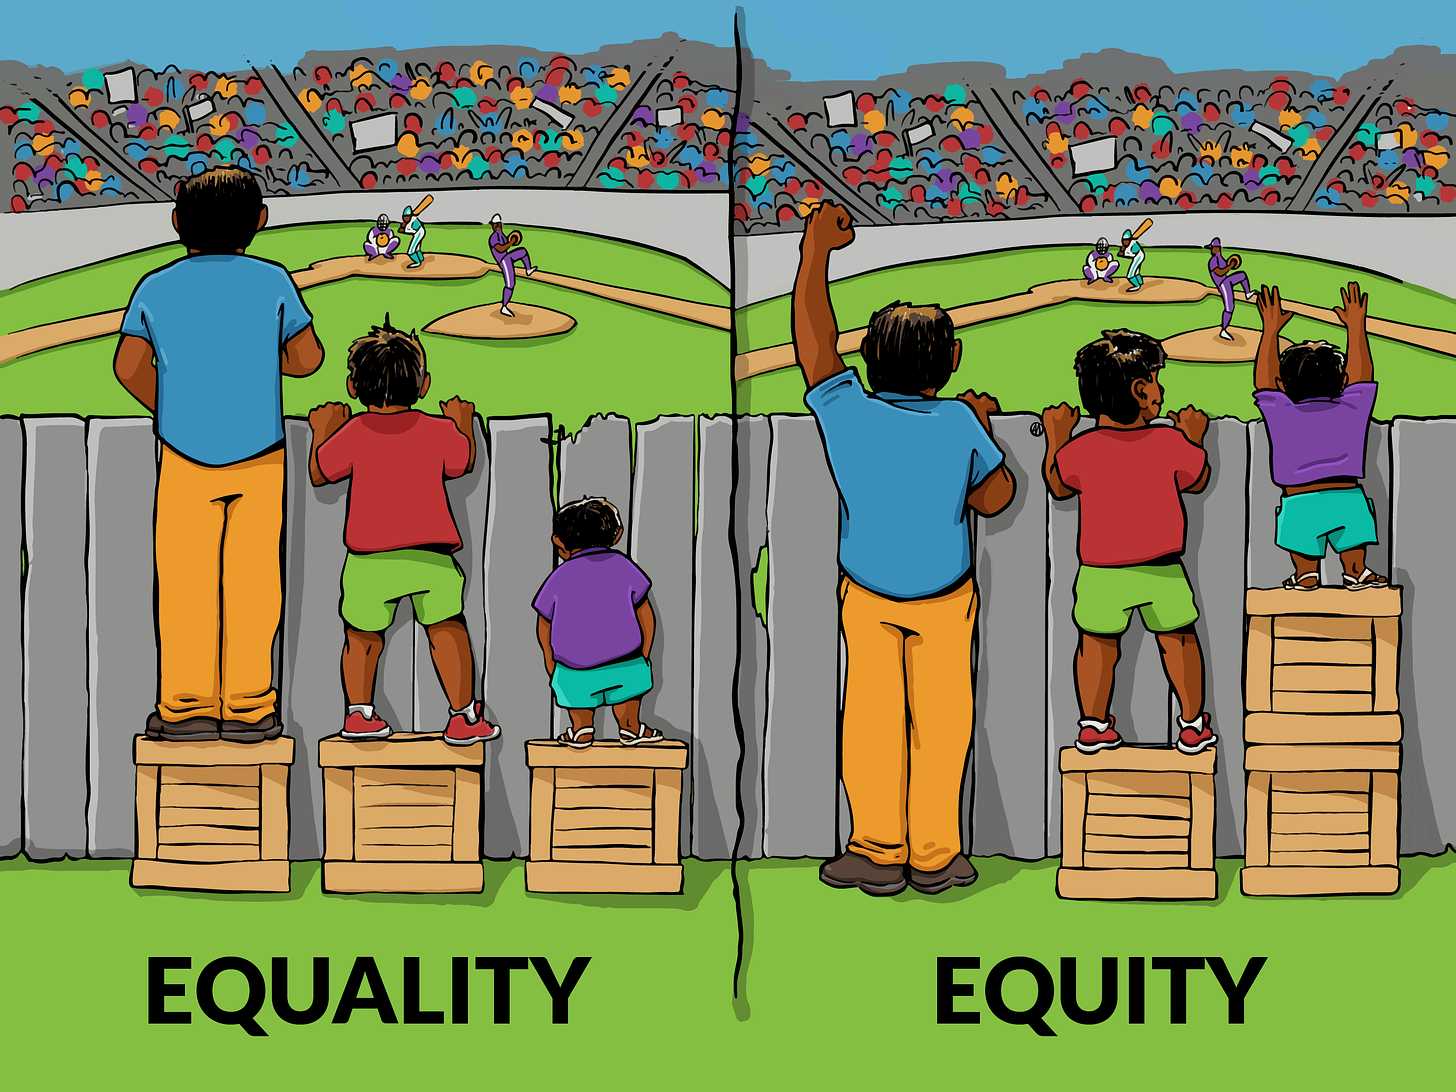 2 panel cartoon illustrating the difference between equality and equity